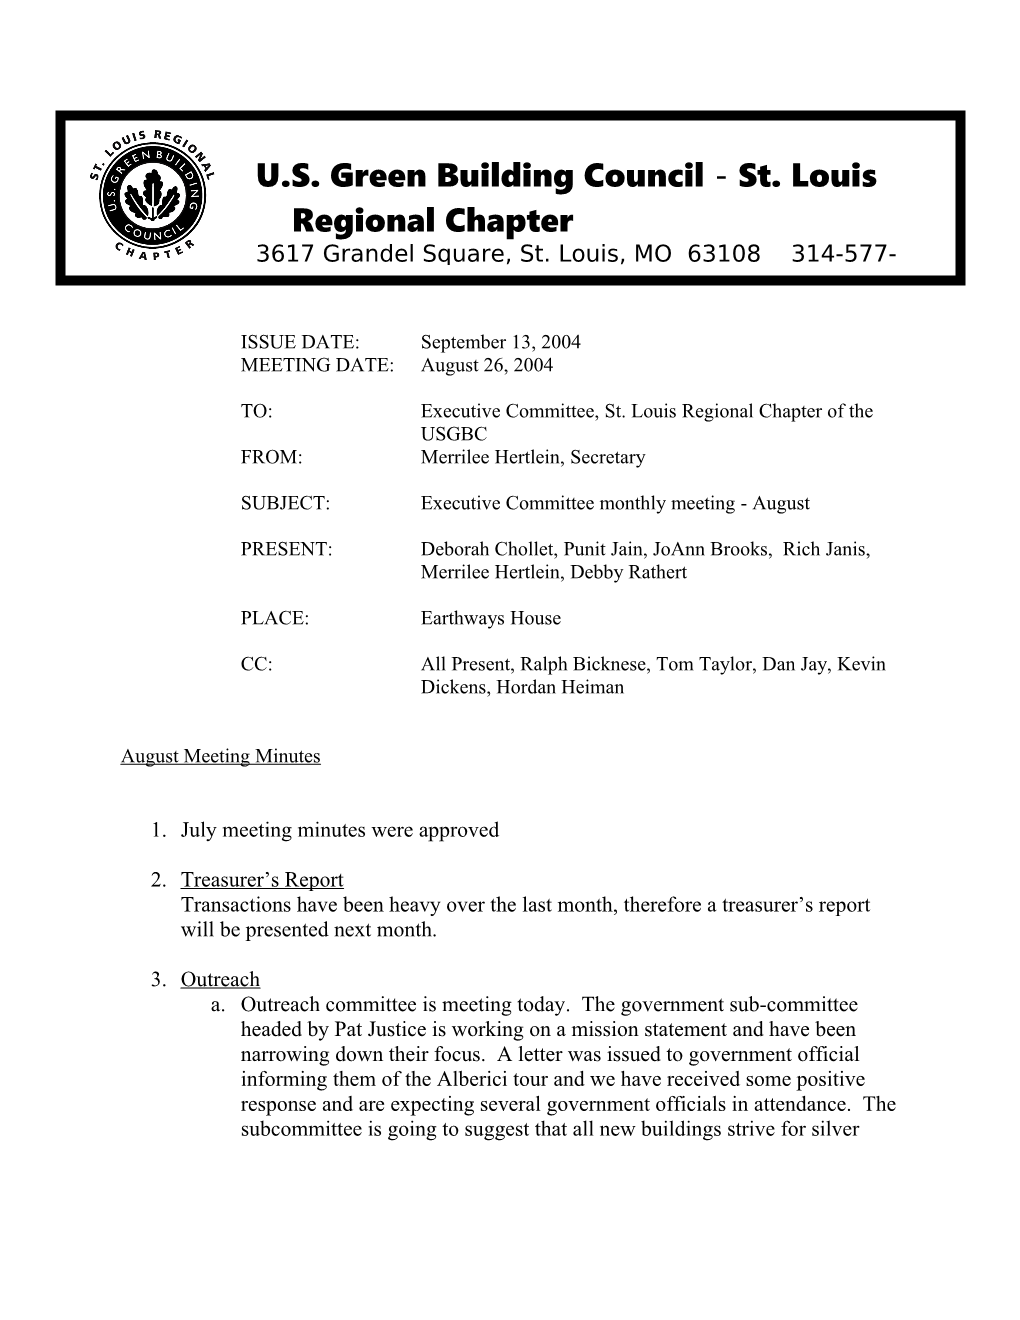 TO:Executive Committee, St. Louis Regional Chapter of the USGBC